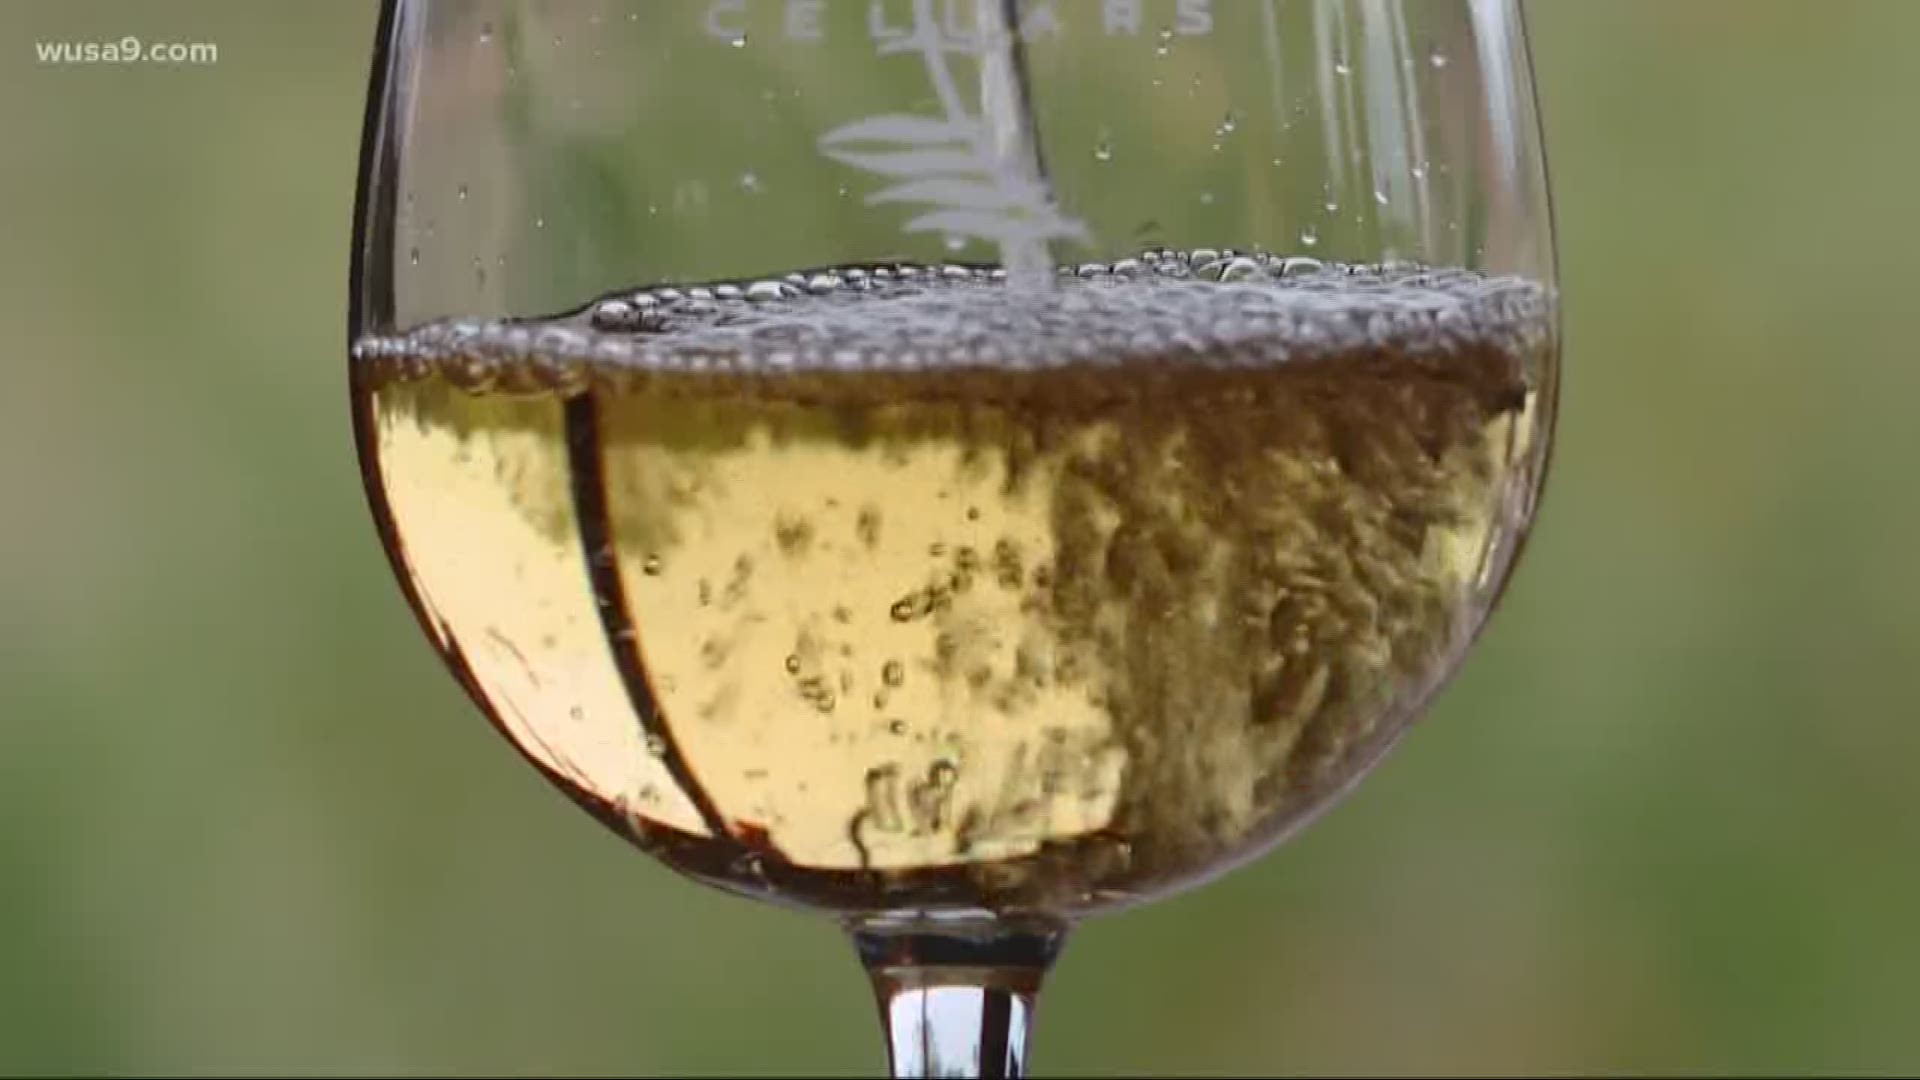 The record temperatures and dry weather is concentrating the flavors in the grapes ripening in Virginia's wine country.